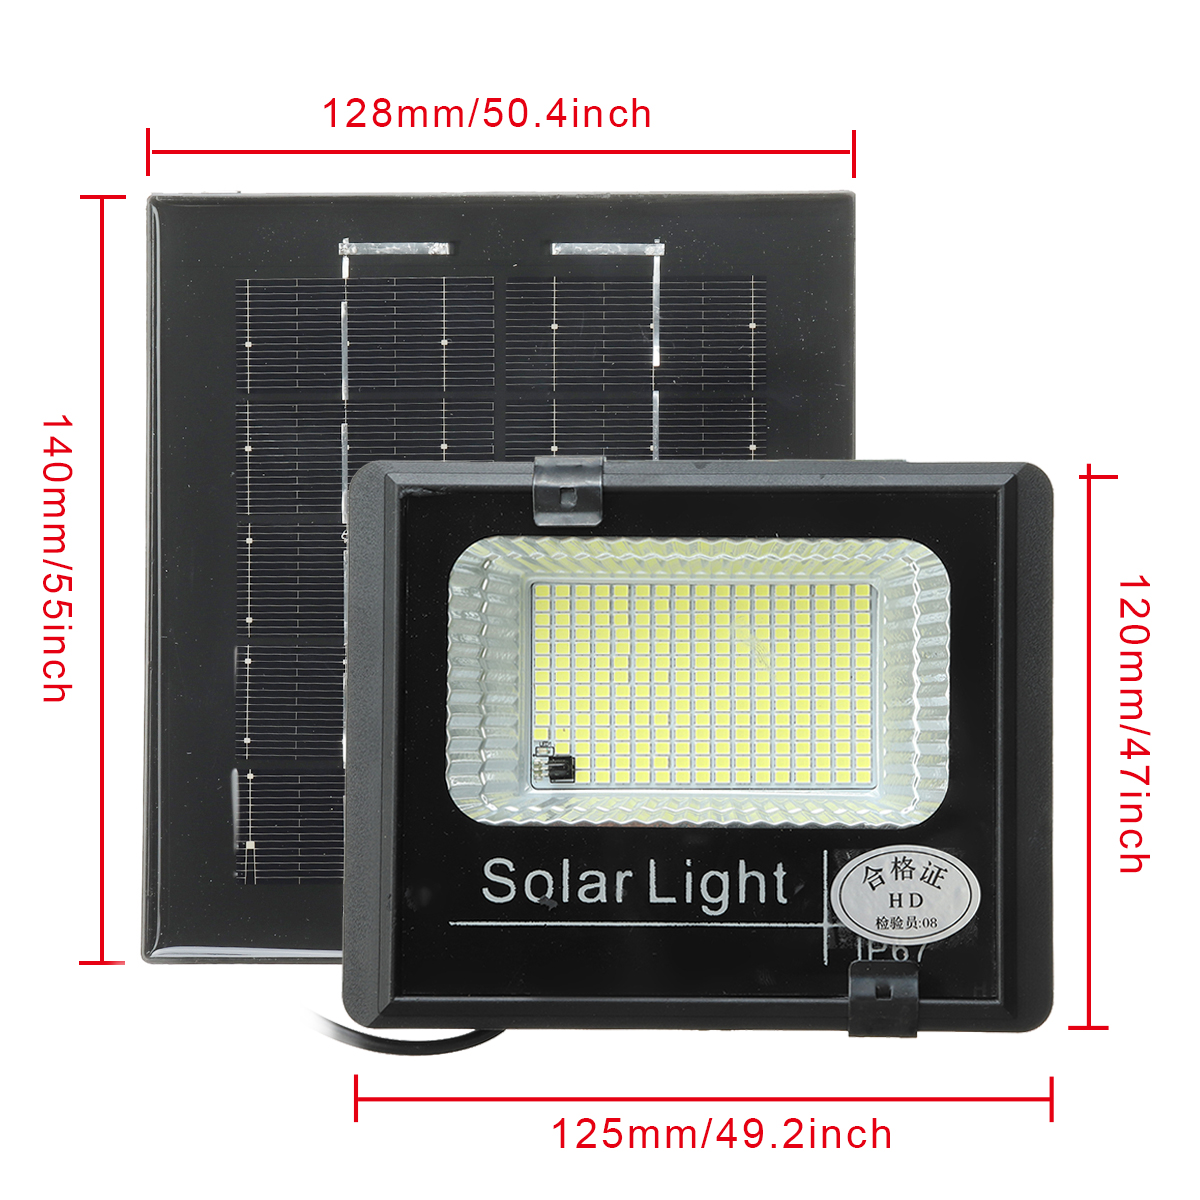 LED-Solar-Flood-Light-with-Remote-Control-Wall-Lamp-IP67-Waterproof-Solar-Powered-Lamp-for-Outdoor-G-1880477-8